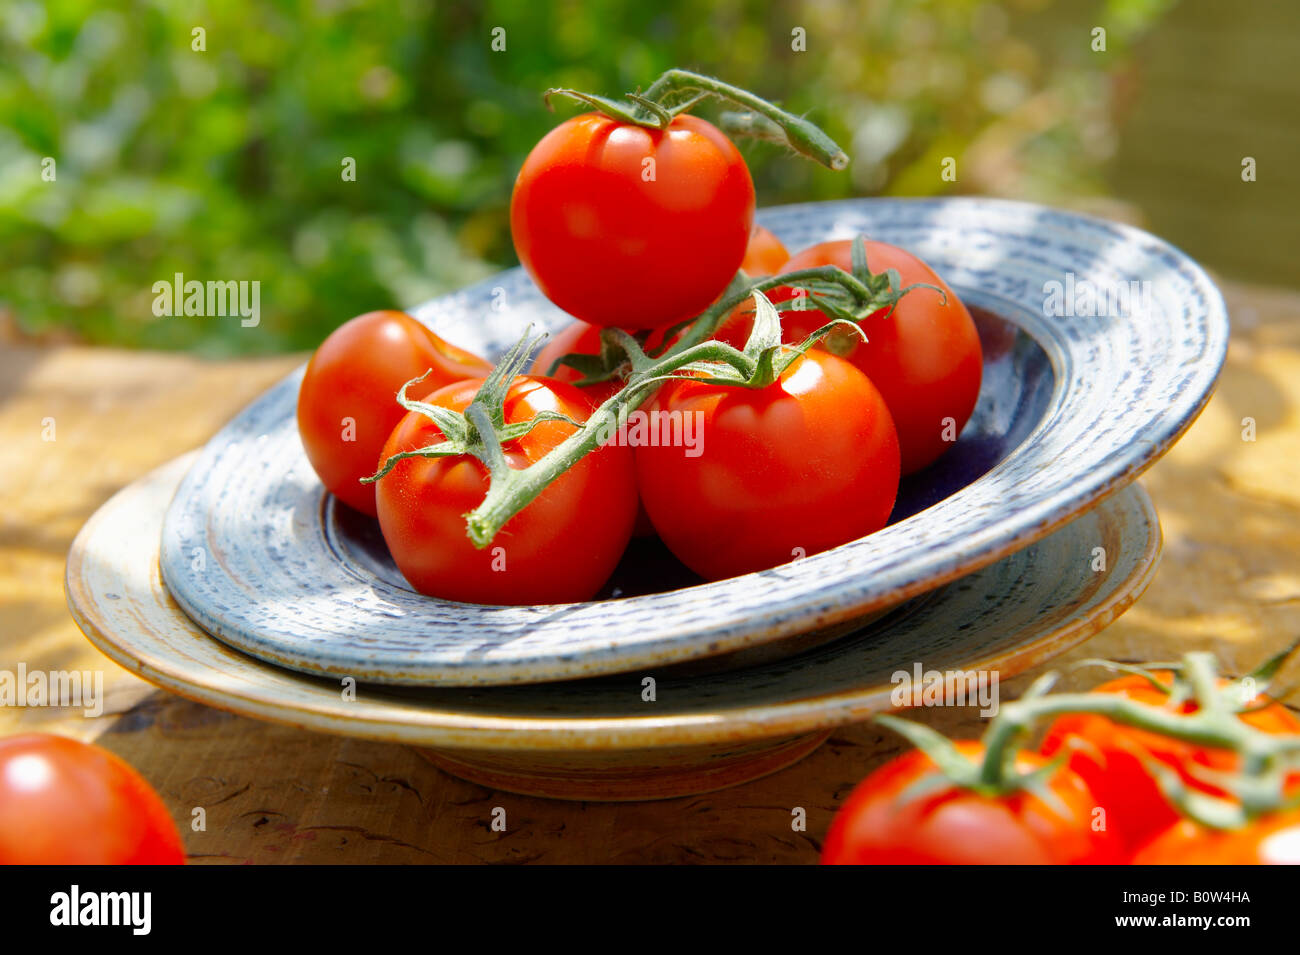 Fresh picked organic tomatoes on the vine in a bowl on a wooden garden table in the sun Stock Photo